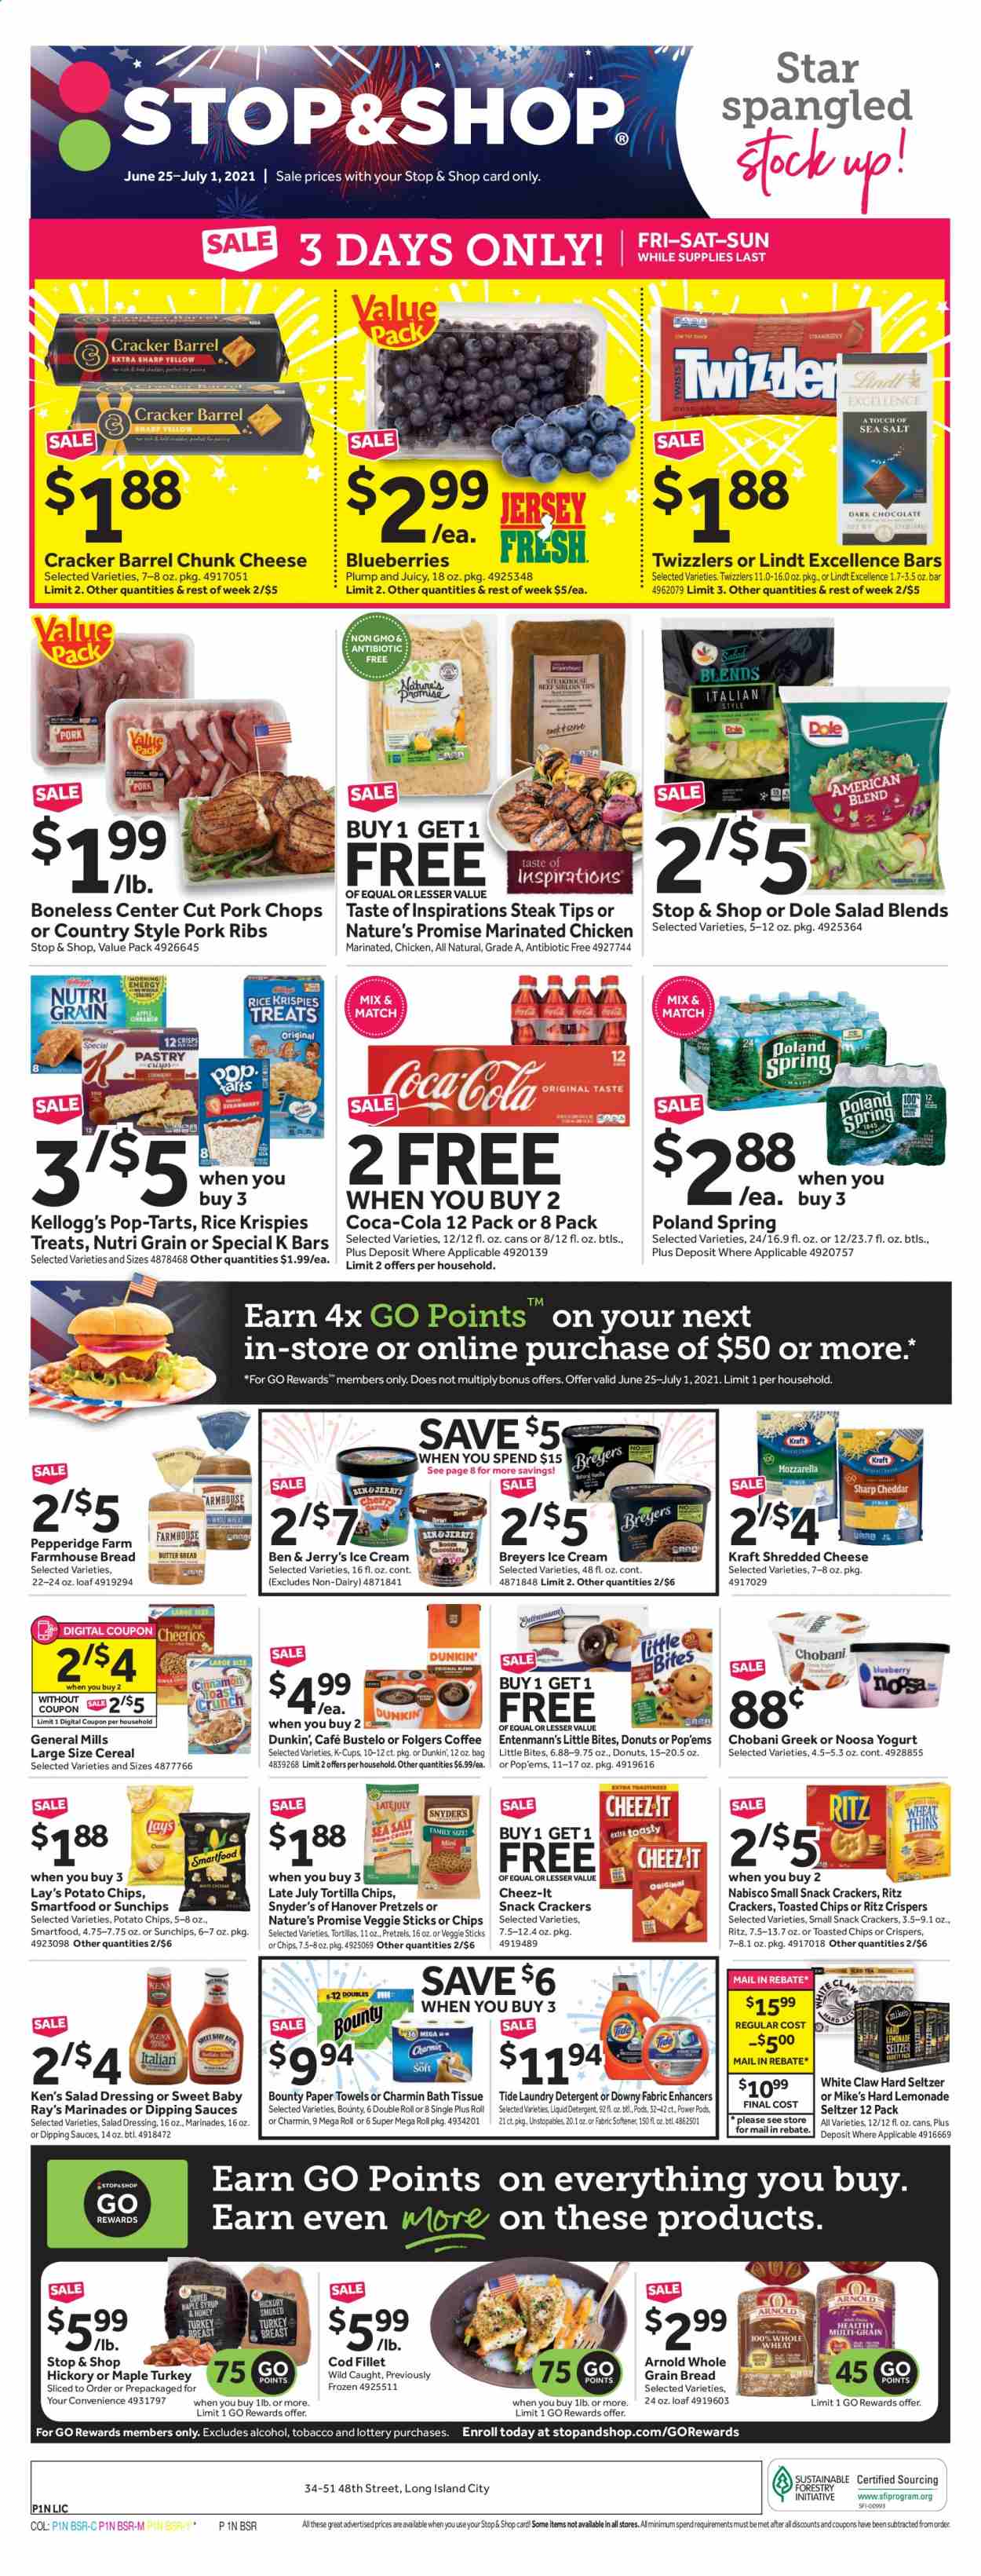 thumbnail - Stop & Shop Flyer - 06/25/2021 - 07/01/2021 - Sales products - bread, pretzels, Nature’s Promise, donut, Entenmann's, Dole, blueberries, marinated chicken, steak, pork chops, pork meat, pork ribs, cod, Kraft®, shredded cheese, chunk cheese, yoghurt, Chobani, ice cream, Ben & Jerry's, snack, Lindt, Bounty, crackers, Kellogg's, Pop-Tarts, Little Bites, RITZ, tortilla chips, potato chips, Lay’s, Smartfood, Cheez-It, cereals, Rice Krispies, Nutri-Grain, salad dressing, dressing, Coca-Cola, Folgers, coffee capsules, K-Cups, White Claw, Hard Seltzer, bath tissue, kitchen towels, paper towels, Charmin, Tide, Unstopables, fabric softener, liquid detergent, laundry detergent, Downy Laundry. Page 1.